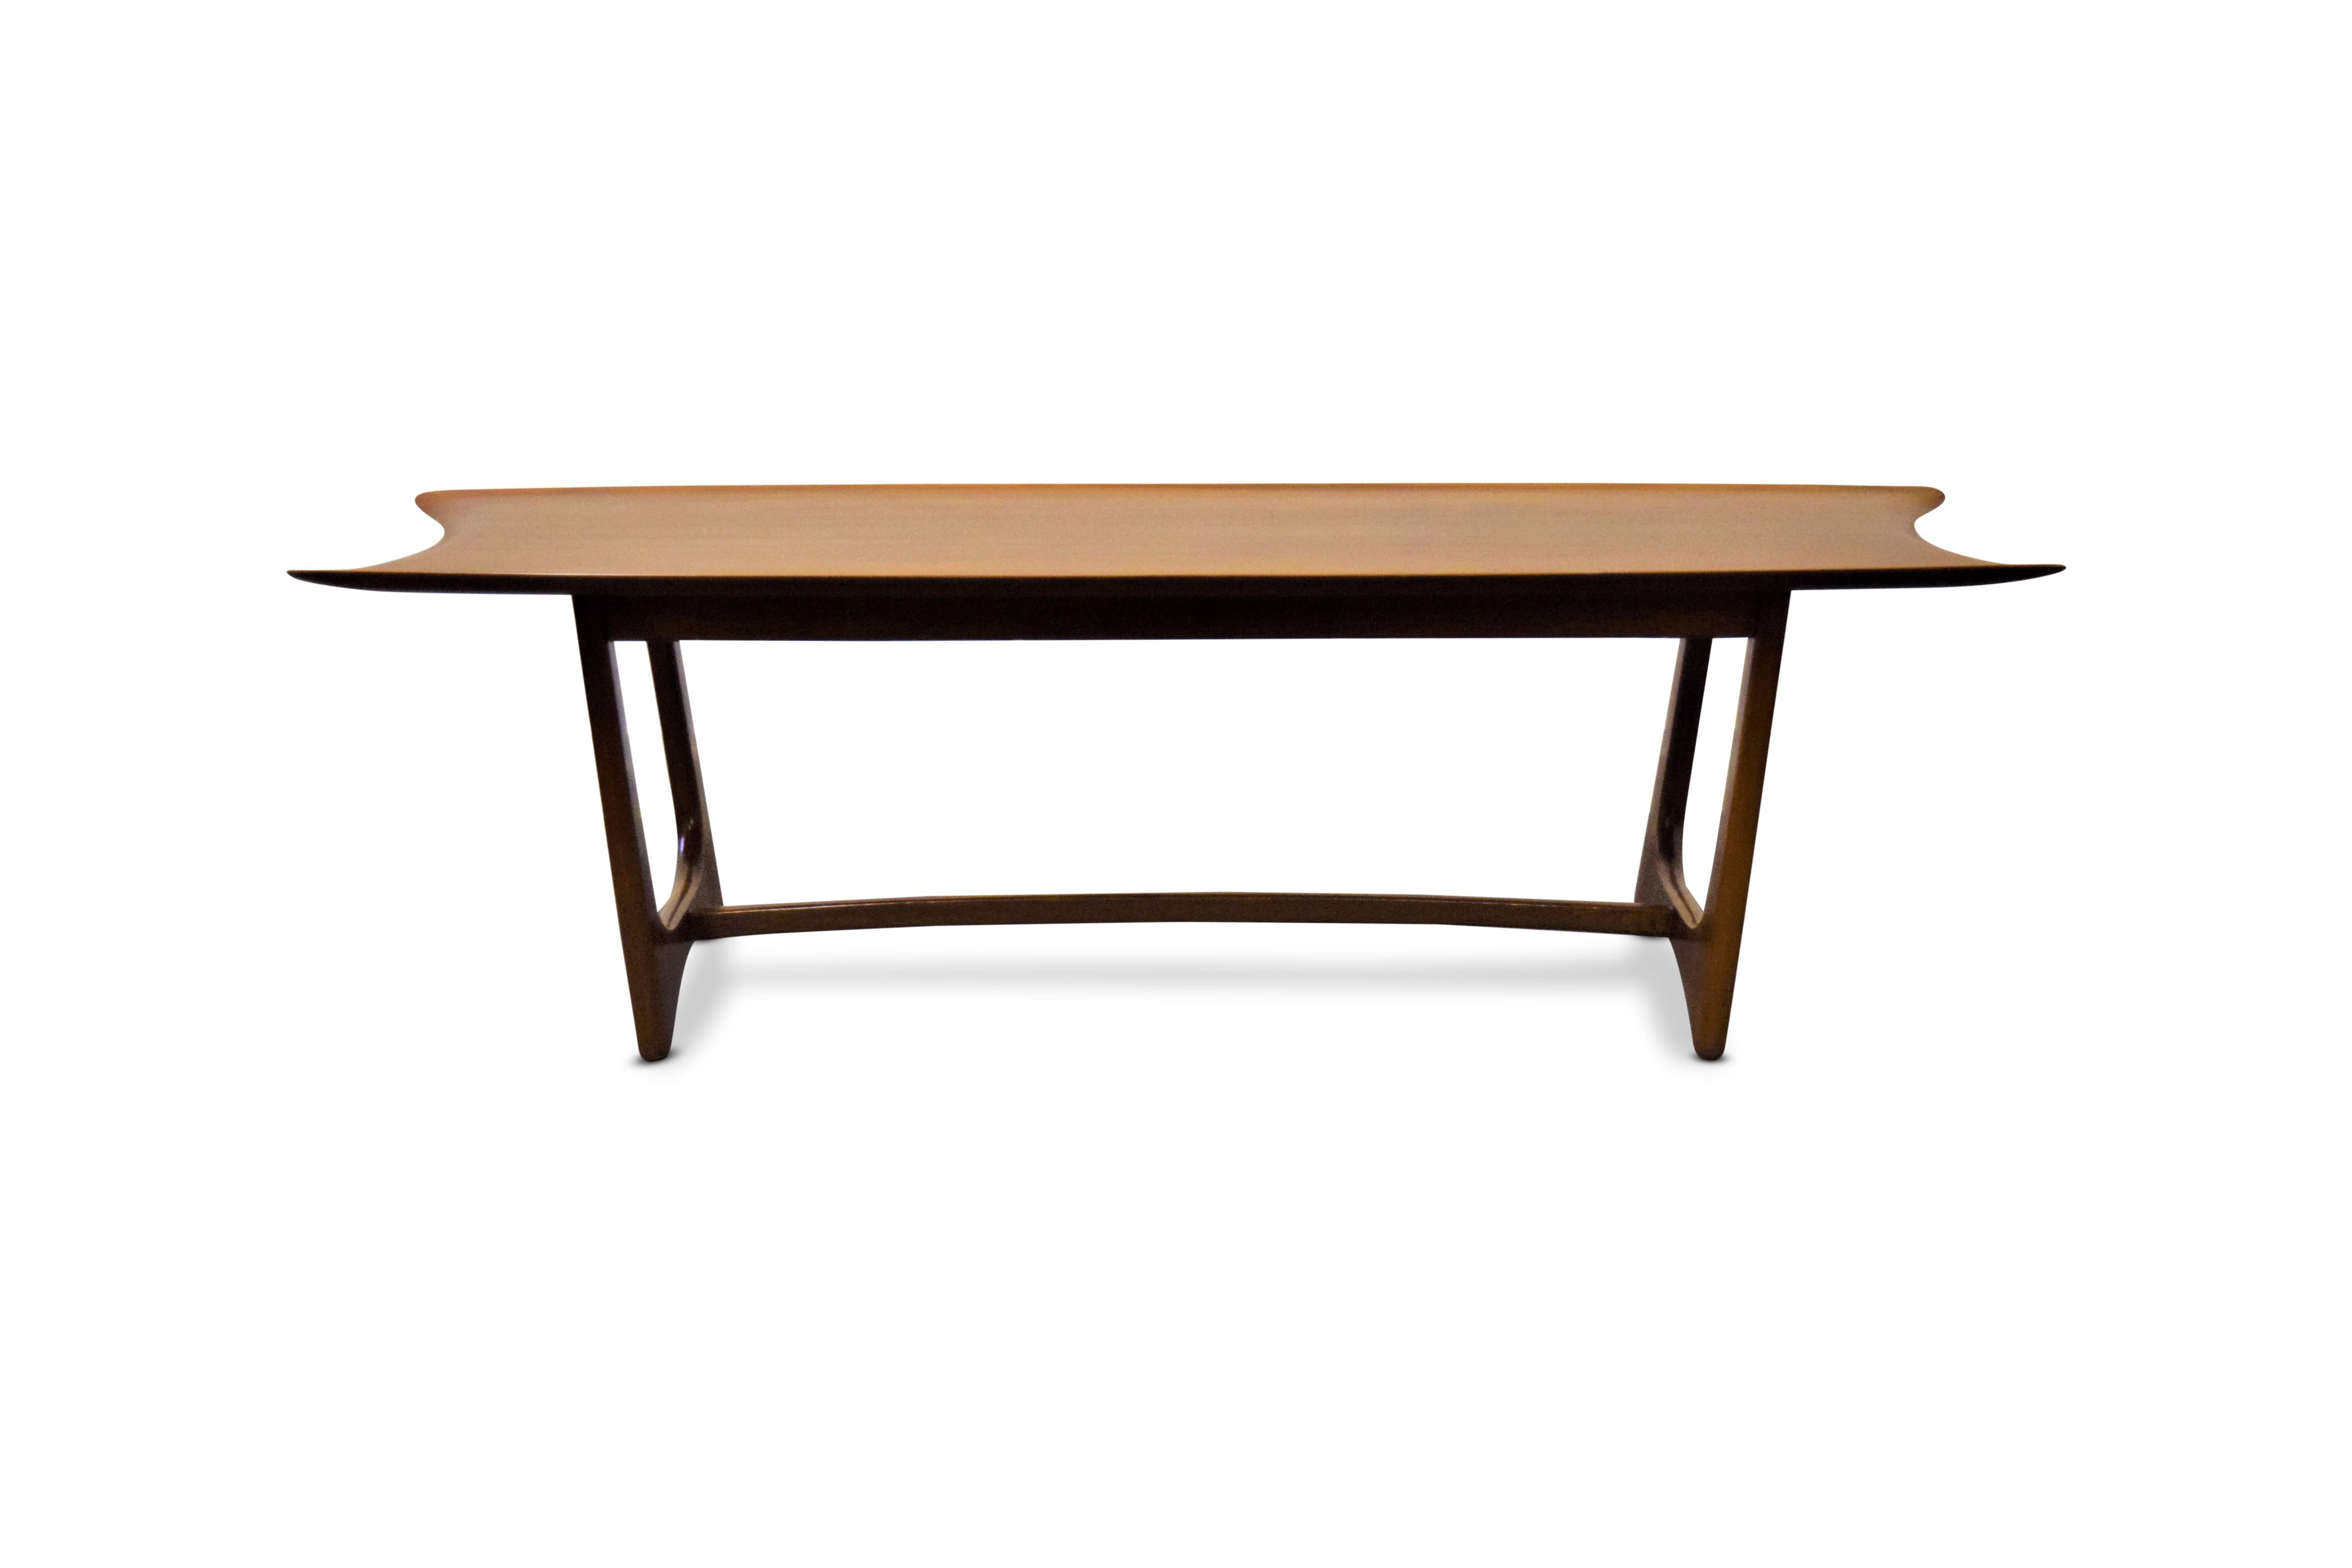 adrian pearsall stingray coffee table